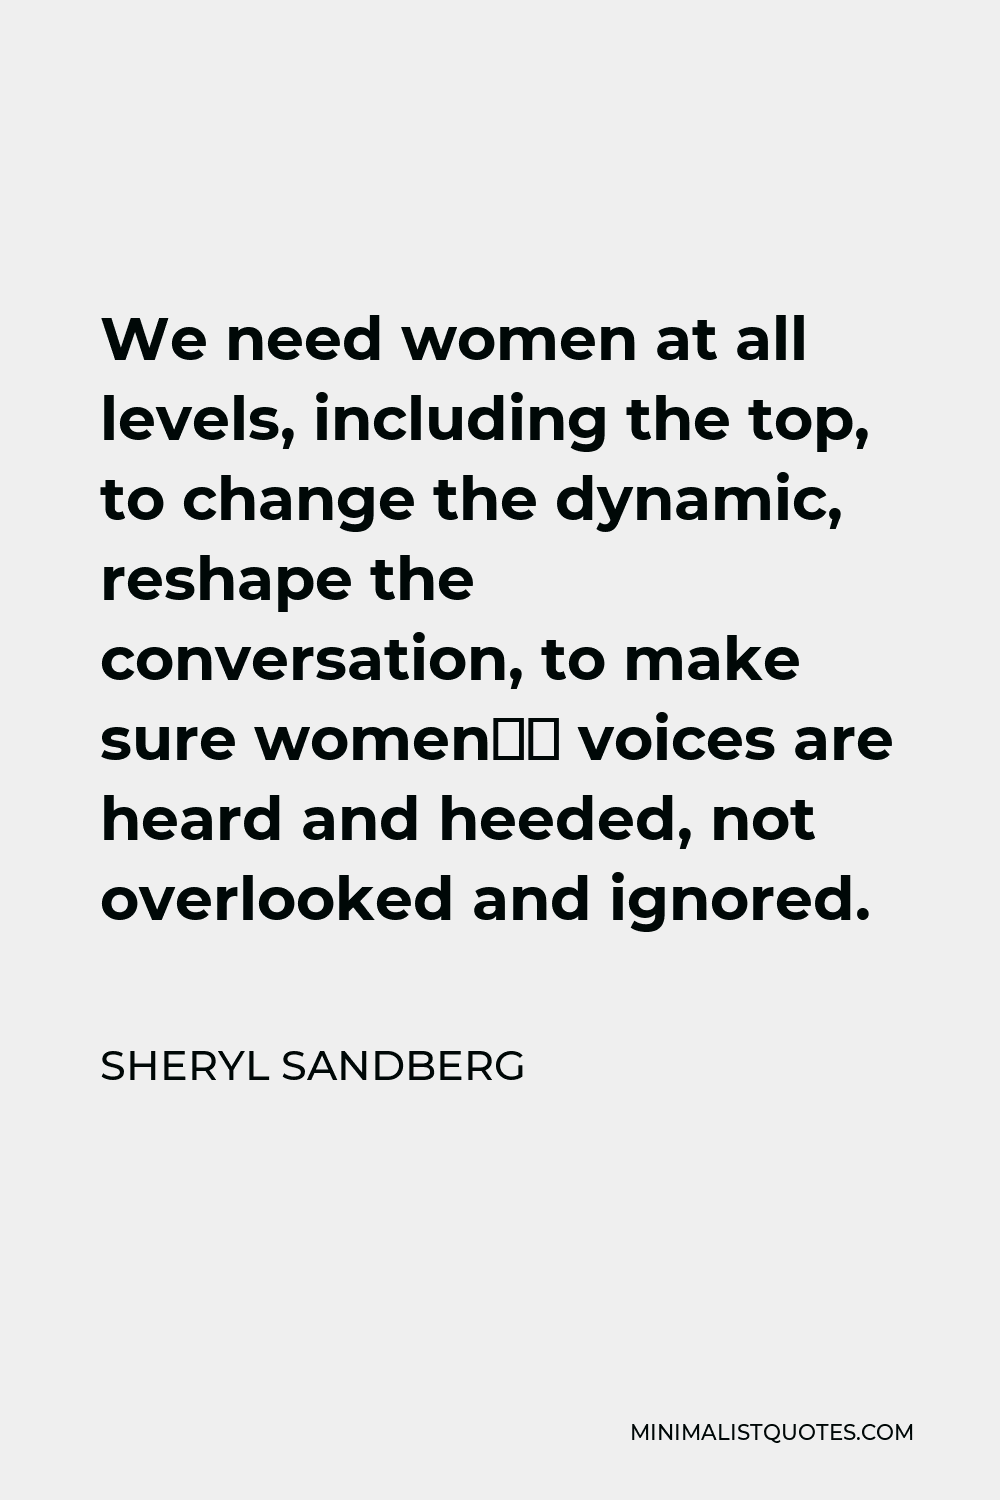 Sheryl Sandberg Quote - We need women at all levels, including the top, to change the dynamic, reshape the conversation, to make sure women’s voices are heard and heeded, not overlooked and ignored.